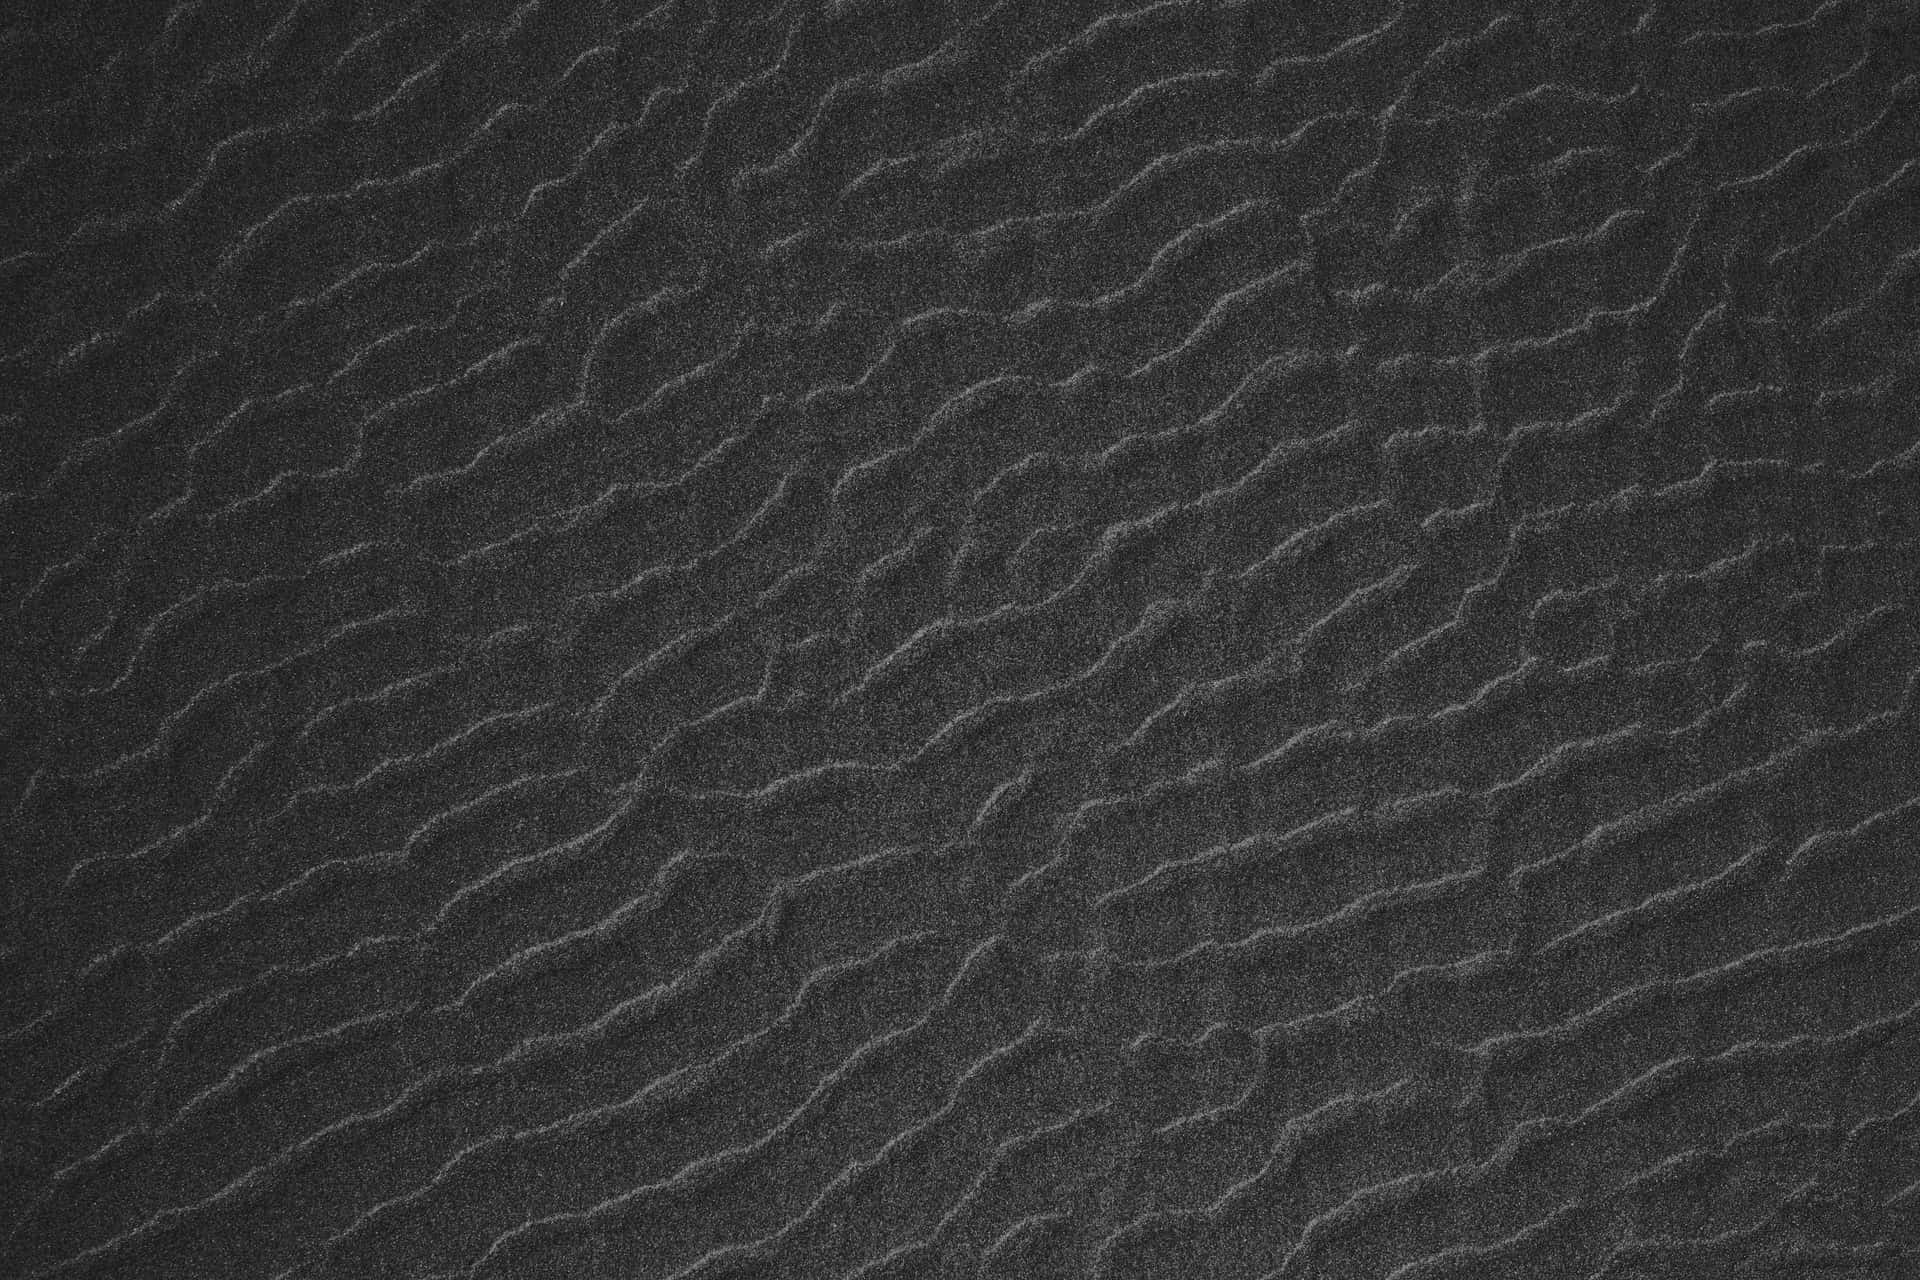 A Black And White Photo Of A Sand Texture Wallpaper